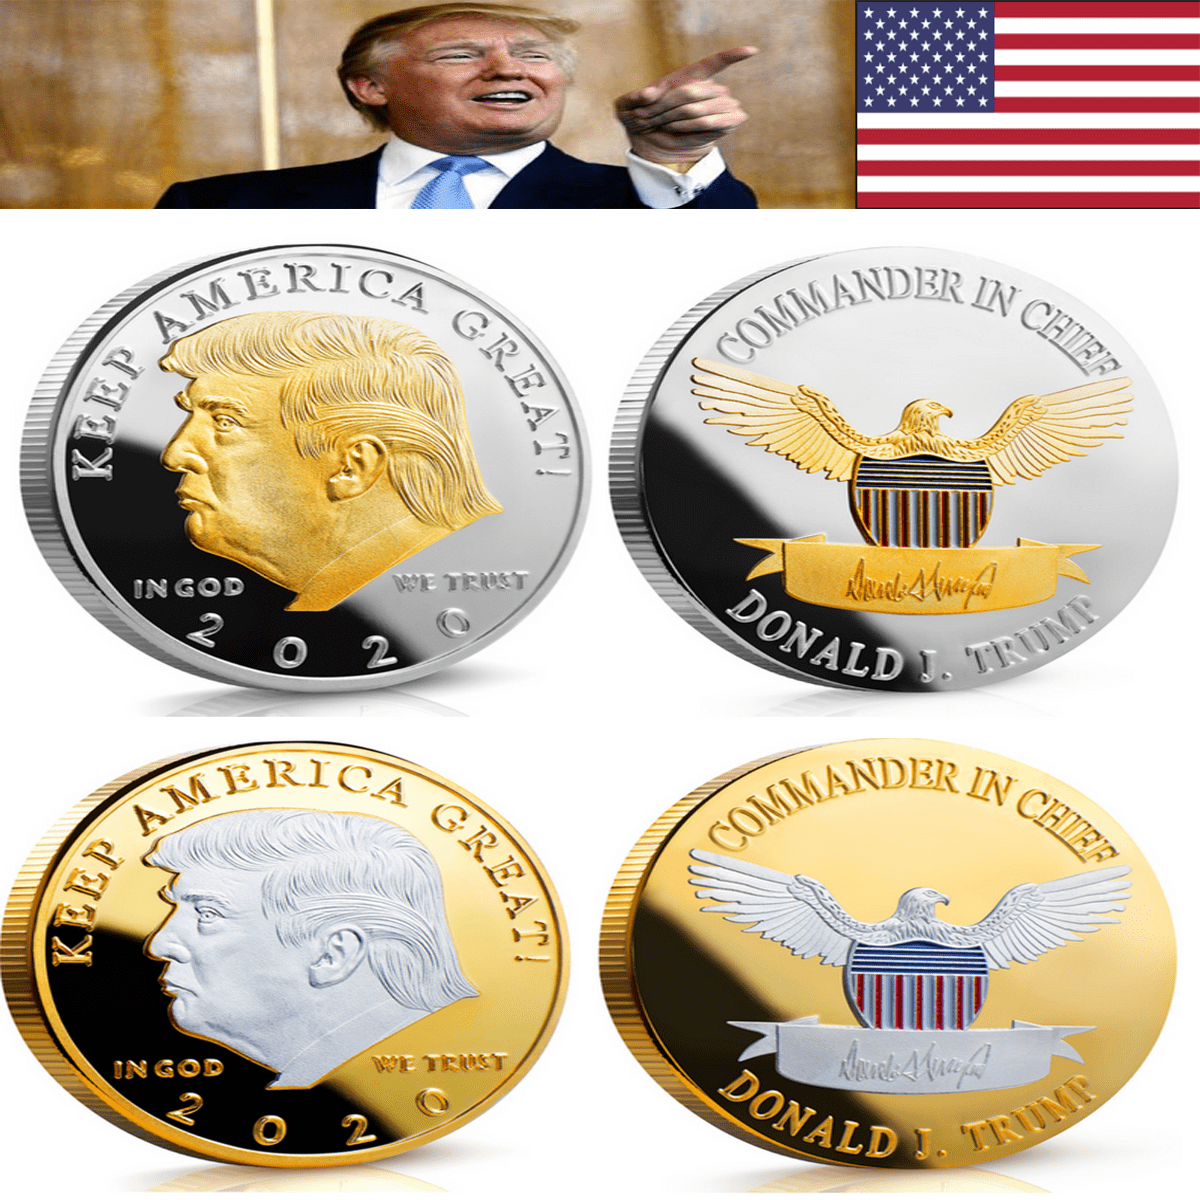 2020 YEAR President Donald Trump Silver & Gold Plated Commemorative Coin 